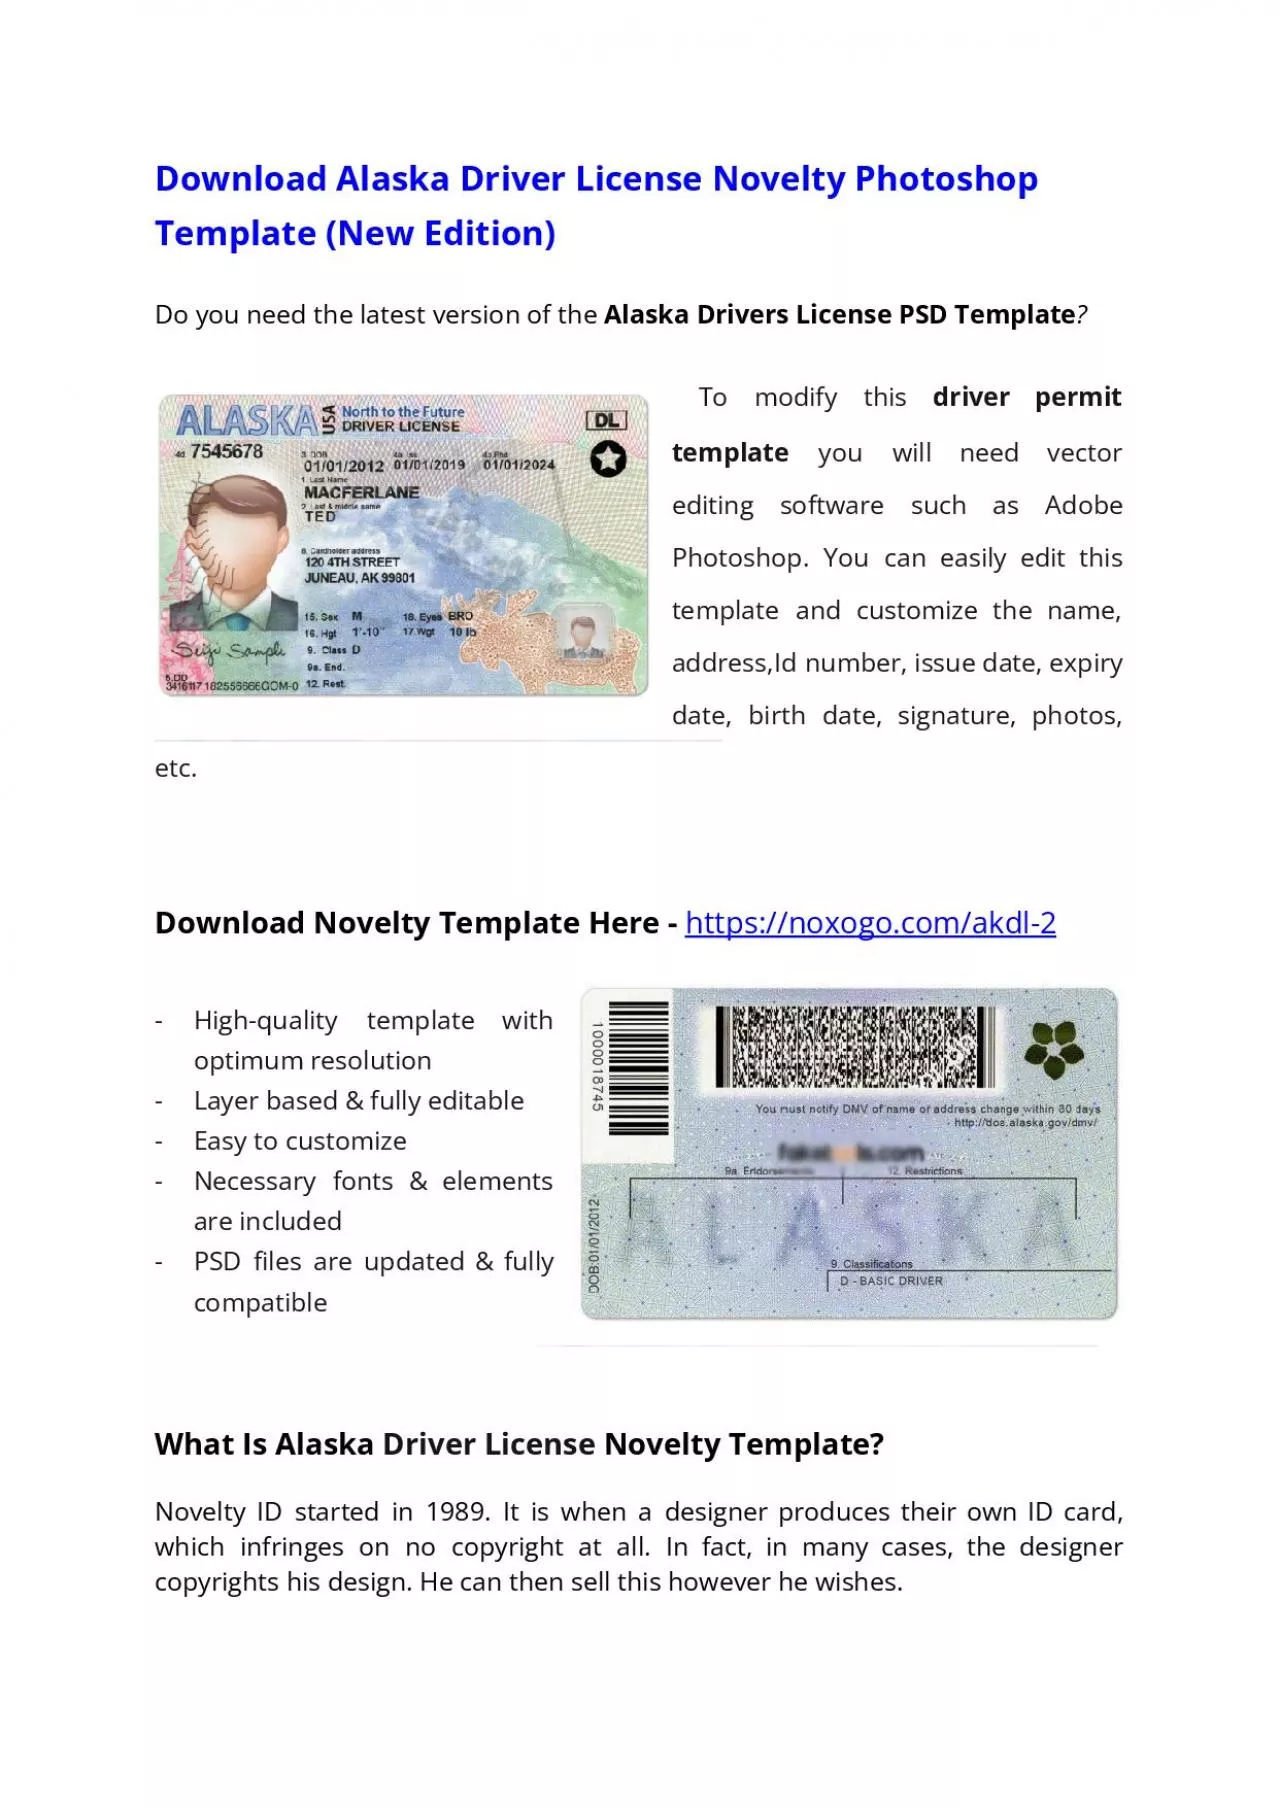 Alaska Drivers License PSD Template (New Edition) – Download Photoshop File